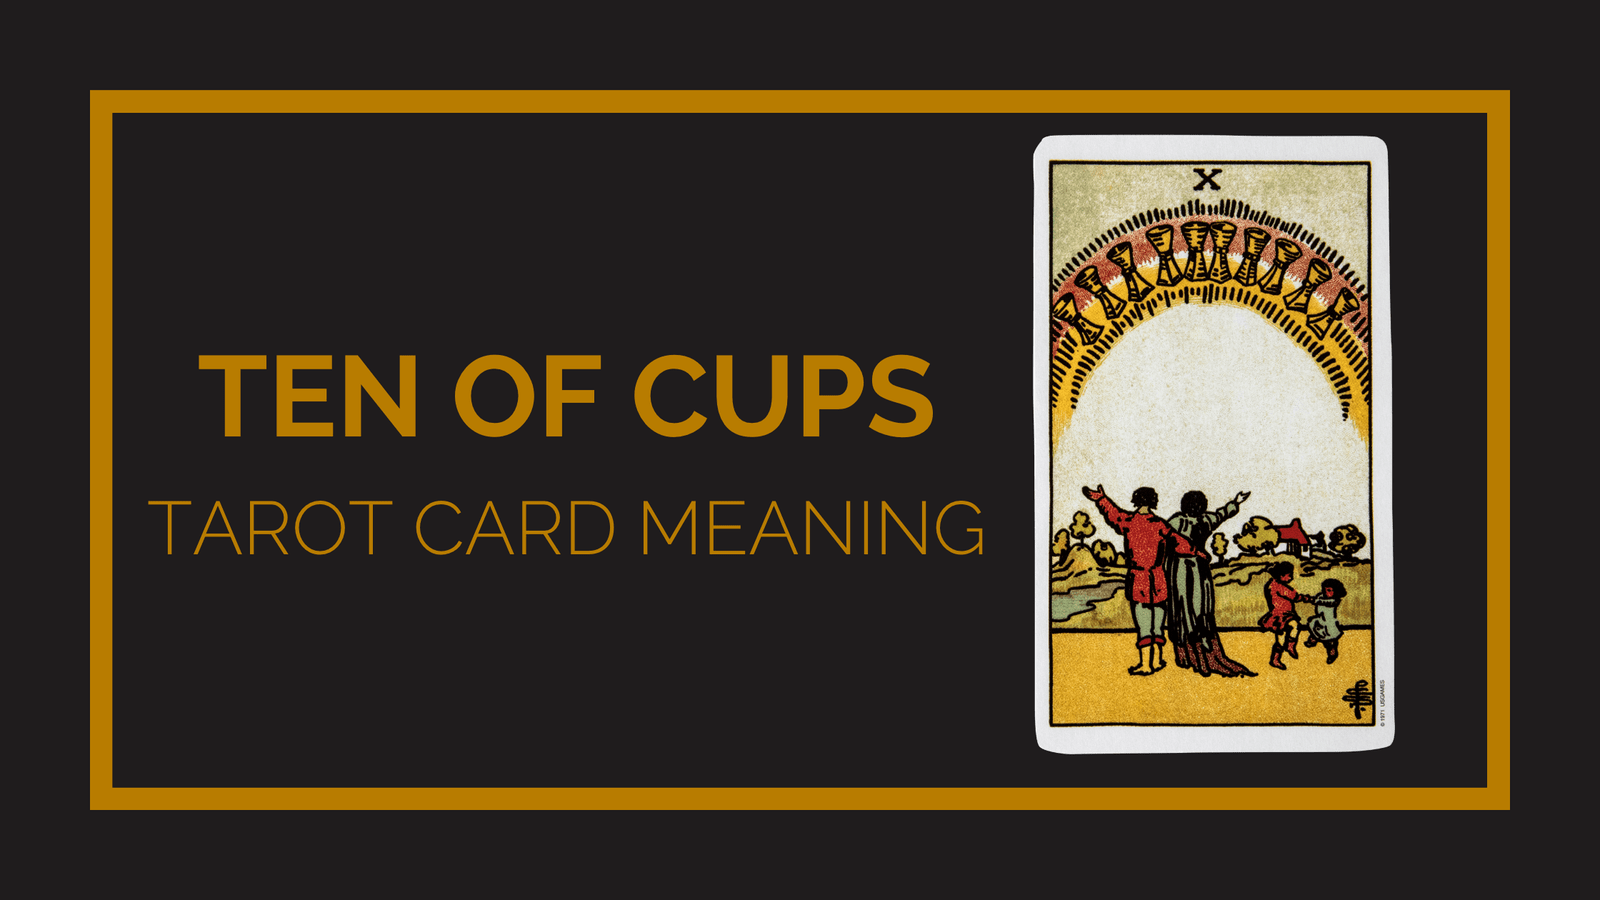 Ten of cups tarot card meaning | tarot with gord